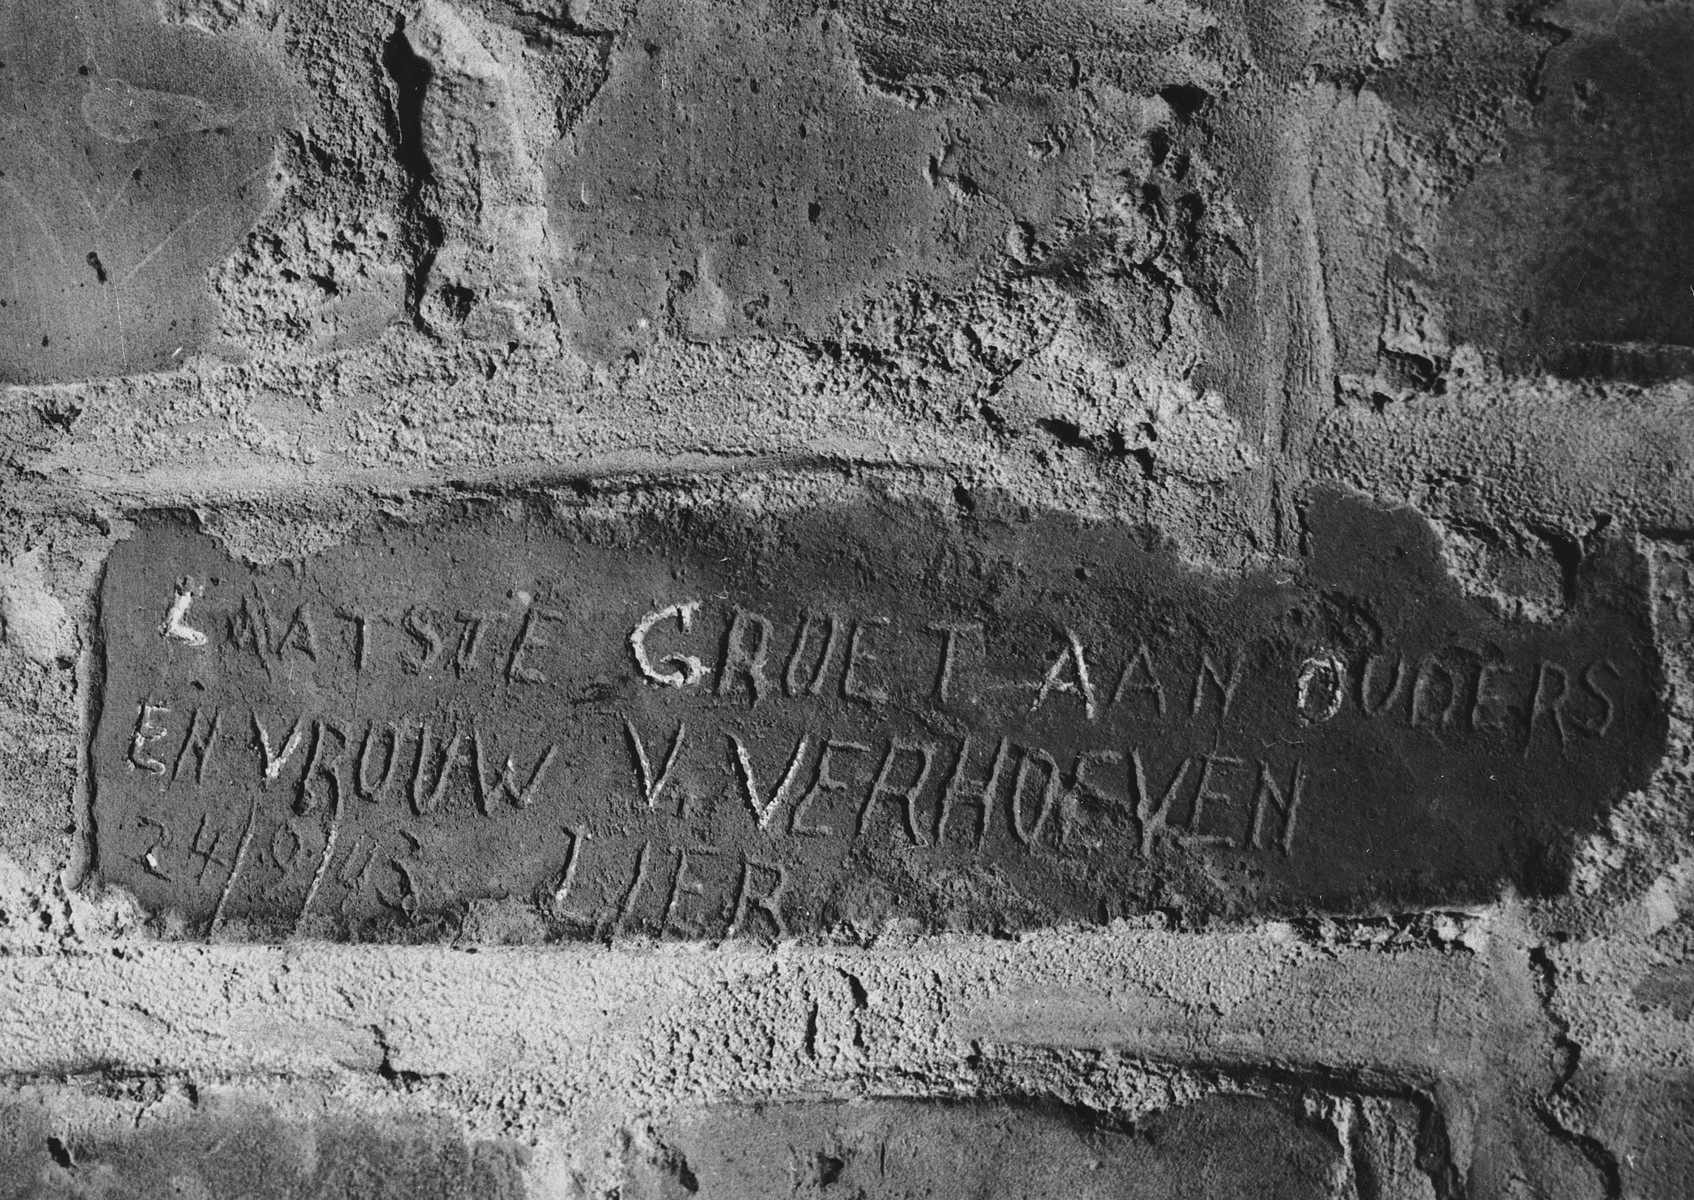 Prisoner name scratched on the wall of the Breendonck internment camp.